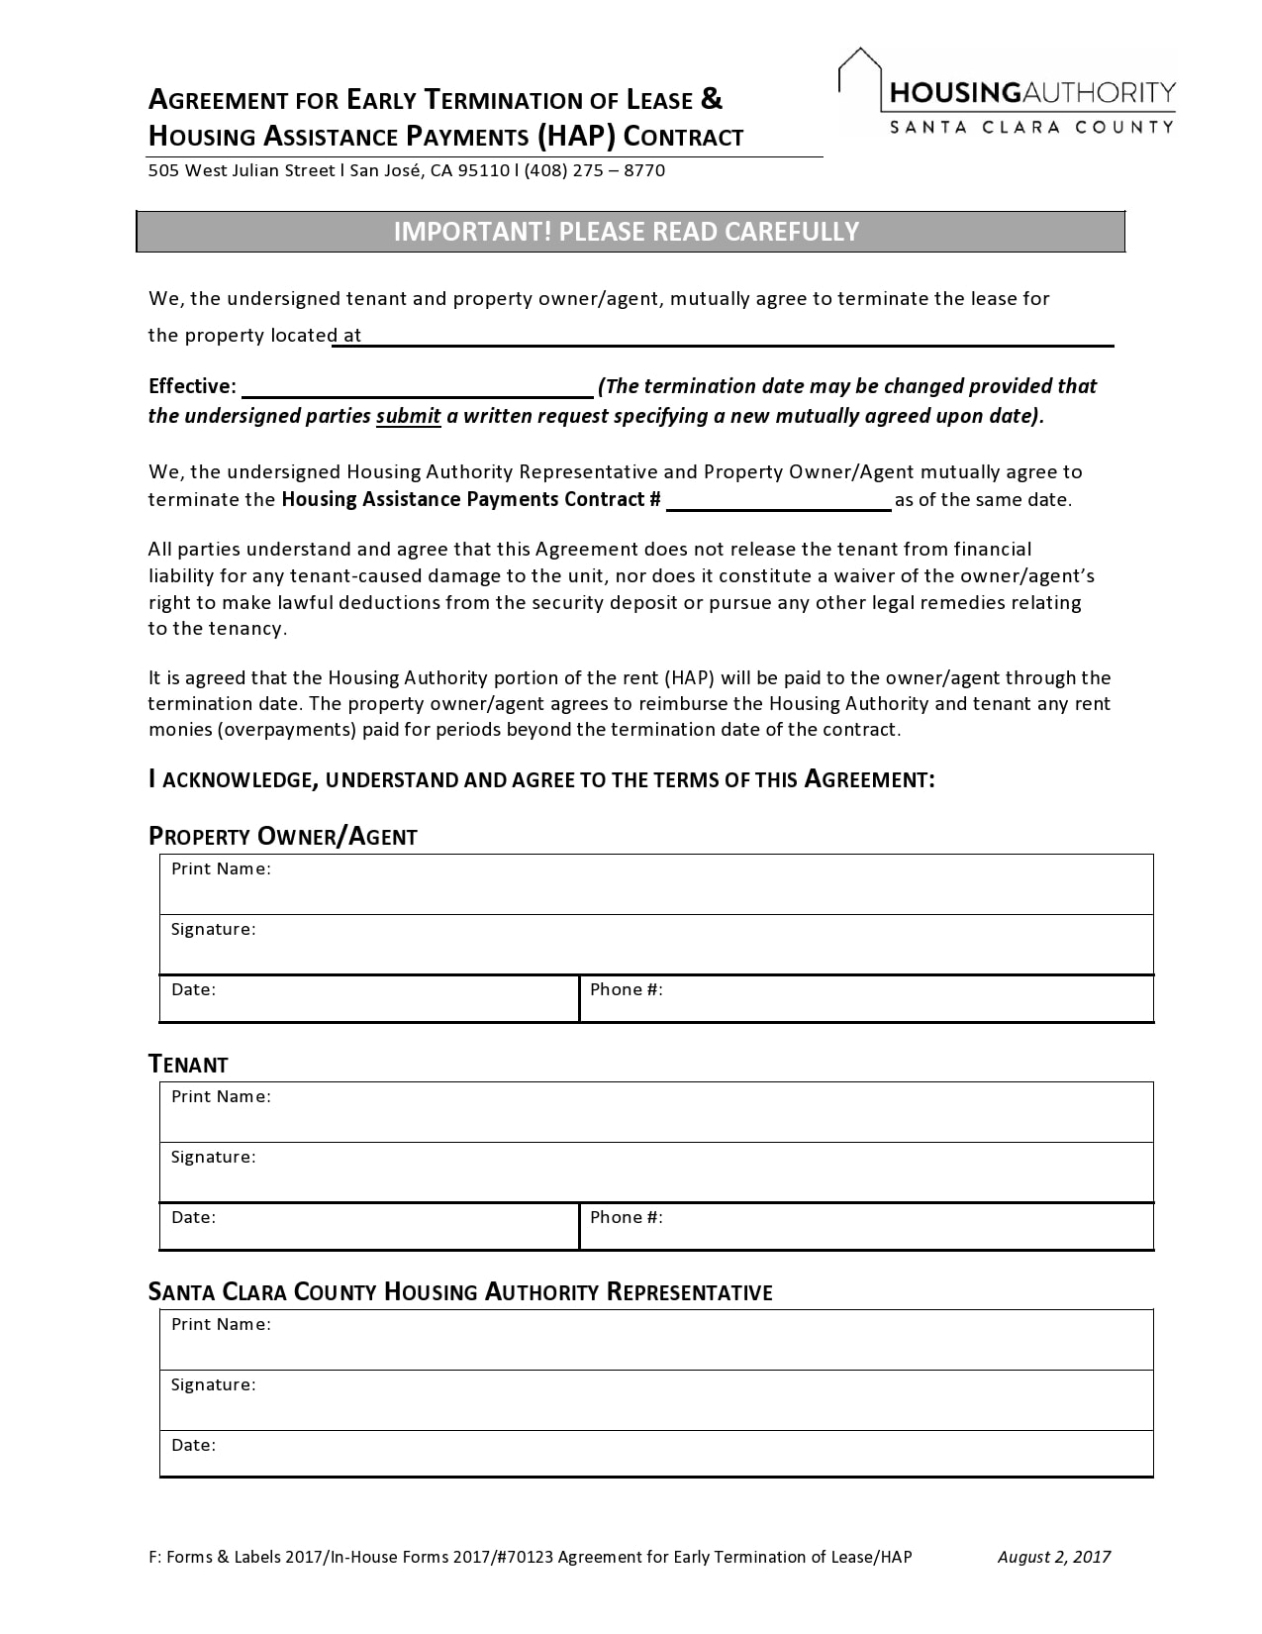 30 Best Early Lease Termination Letters - Templatearchive Regarding Early Termination Of Lease Agreement Template